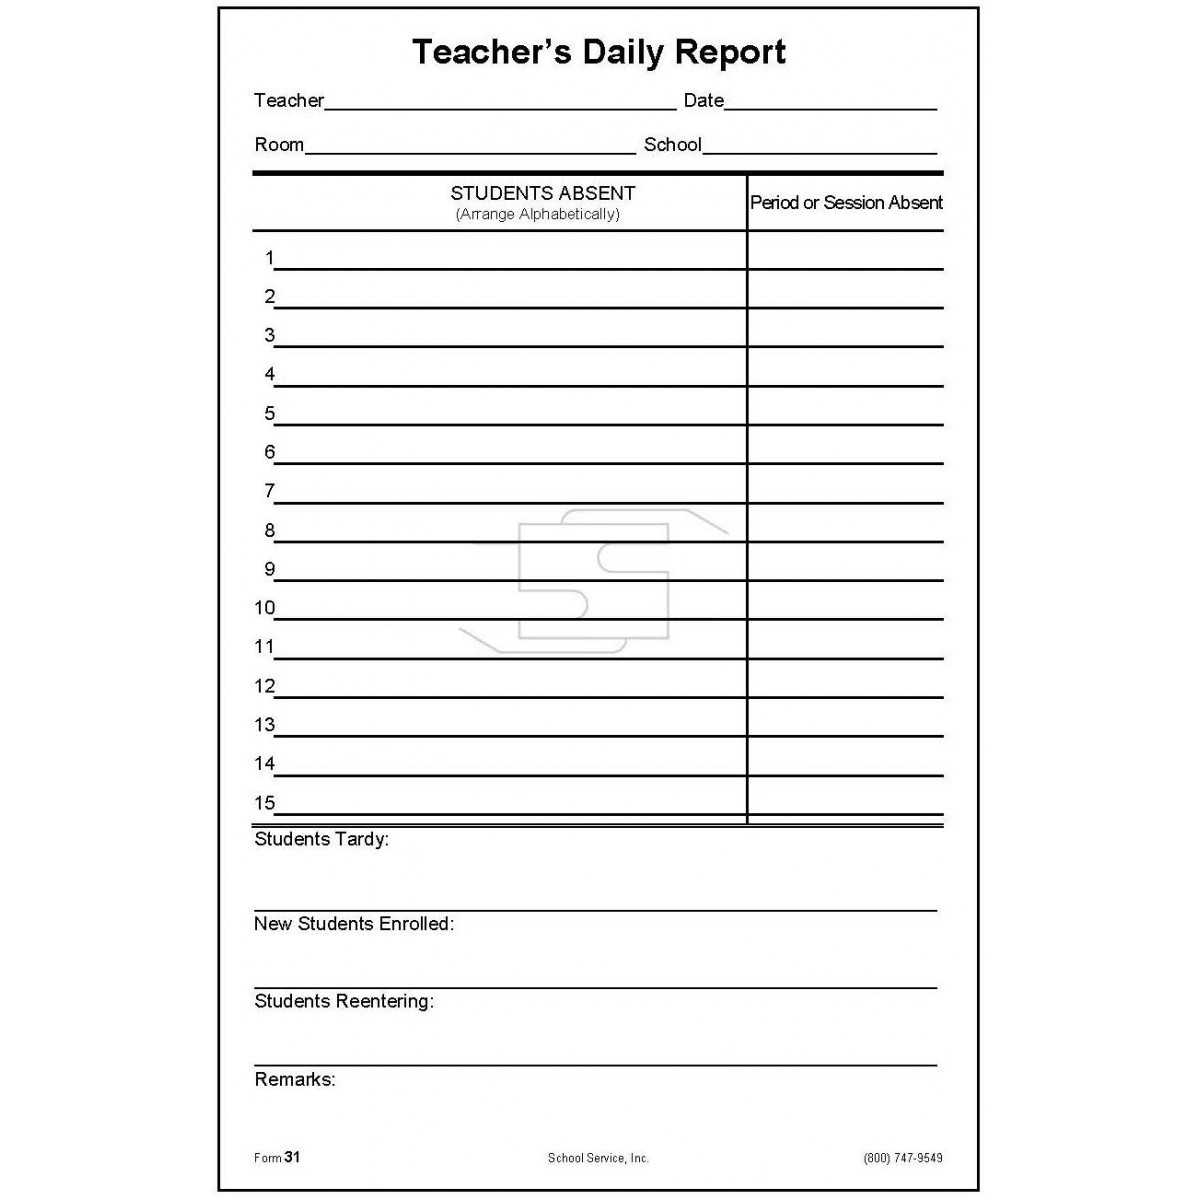 031 Construction Daily Report Template Word Form Visit Pertaining To Site Visit Report Template Free Download